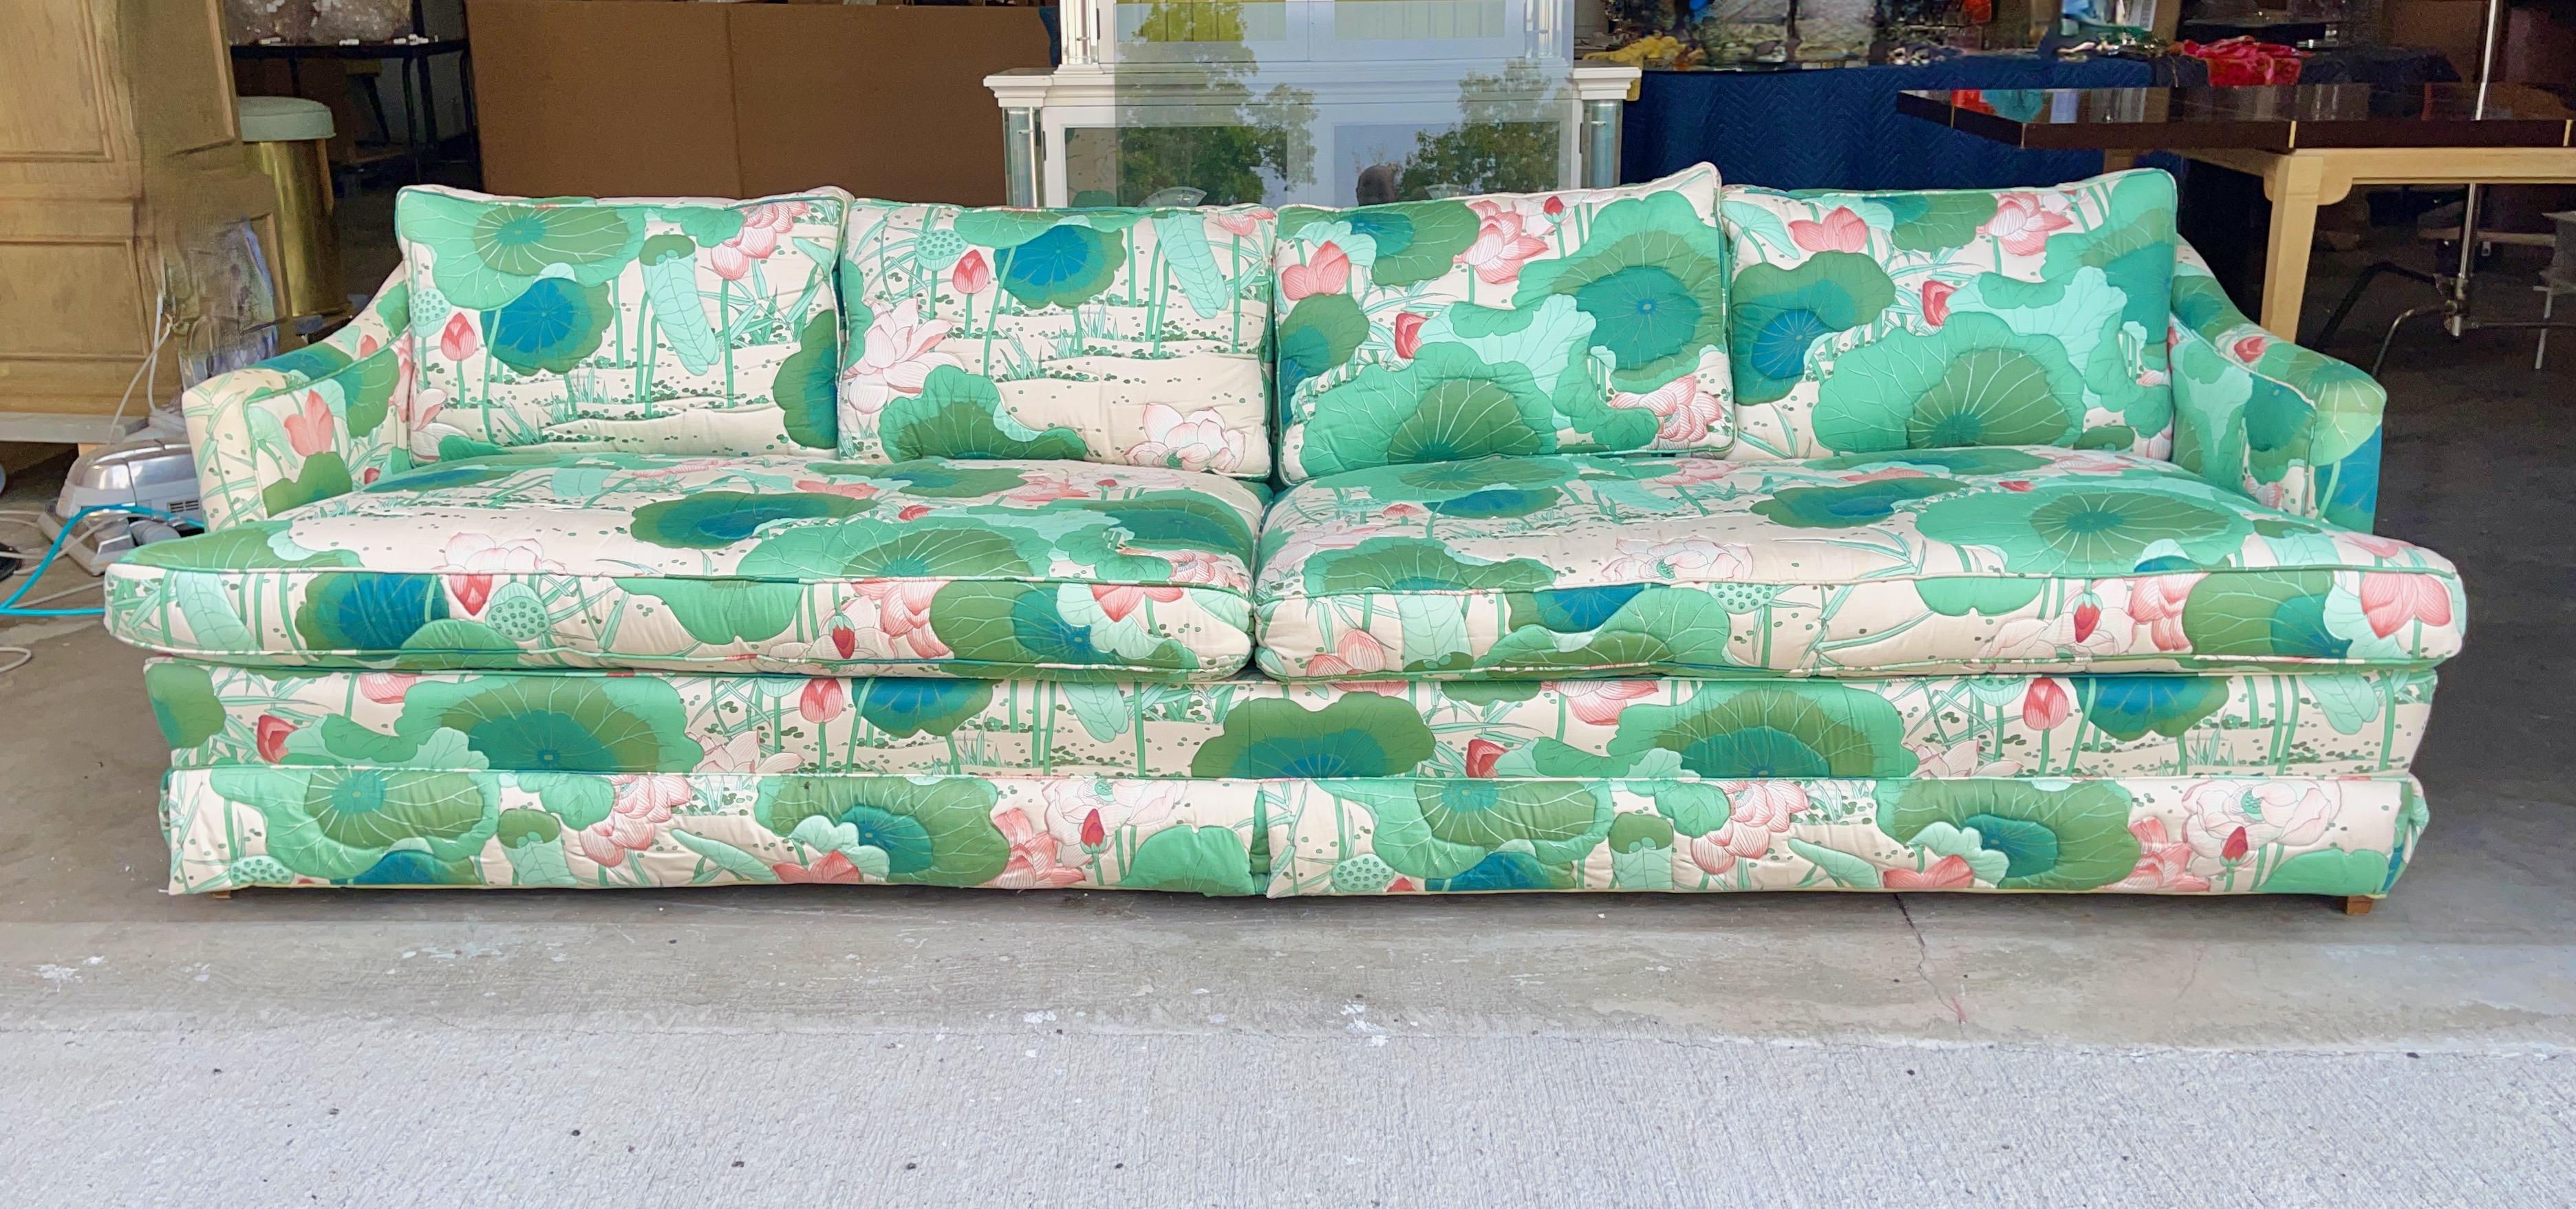 80s couch print